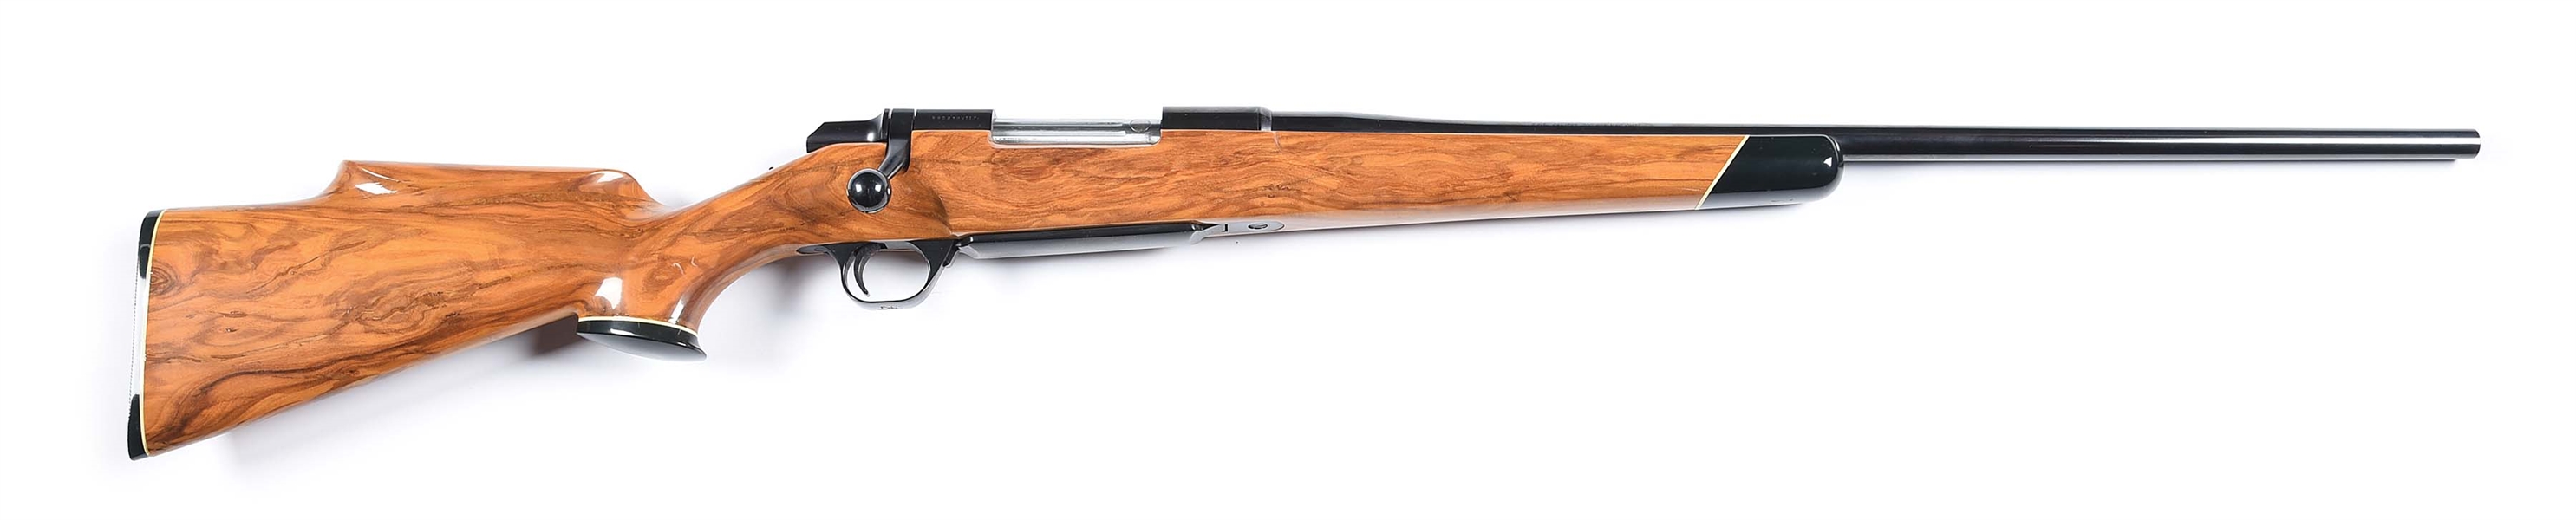 (M) BROWNING BBR BOLT ACTION RIFLE WITH OLIVE/OLEA EUROPEA STOCK.